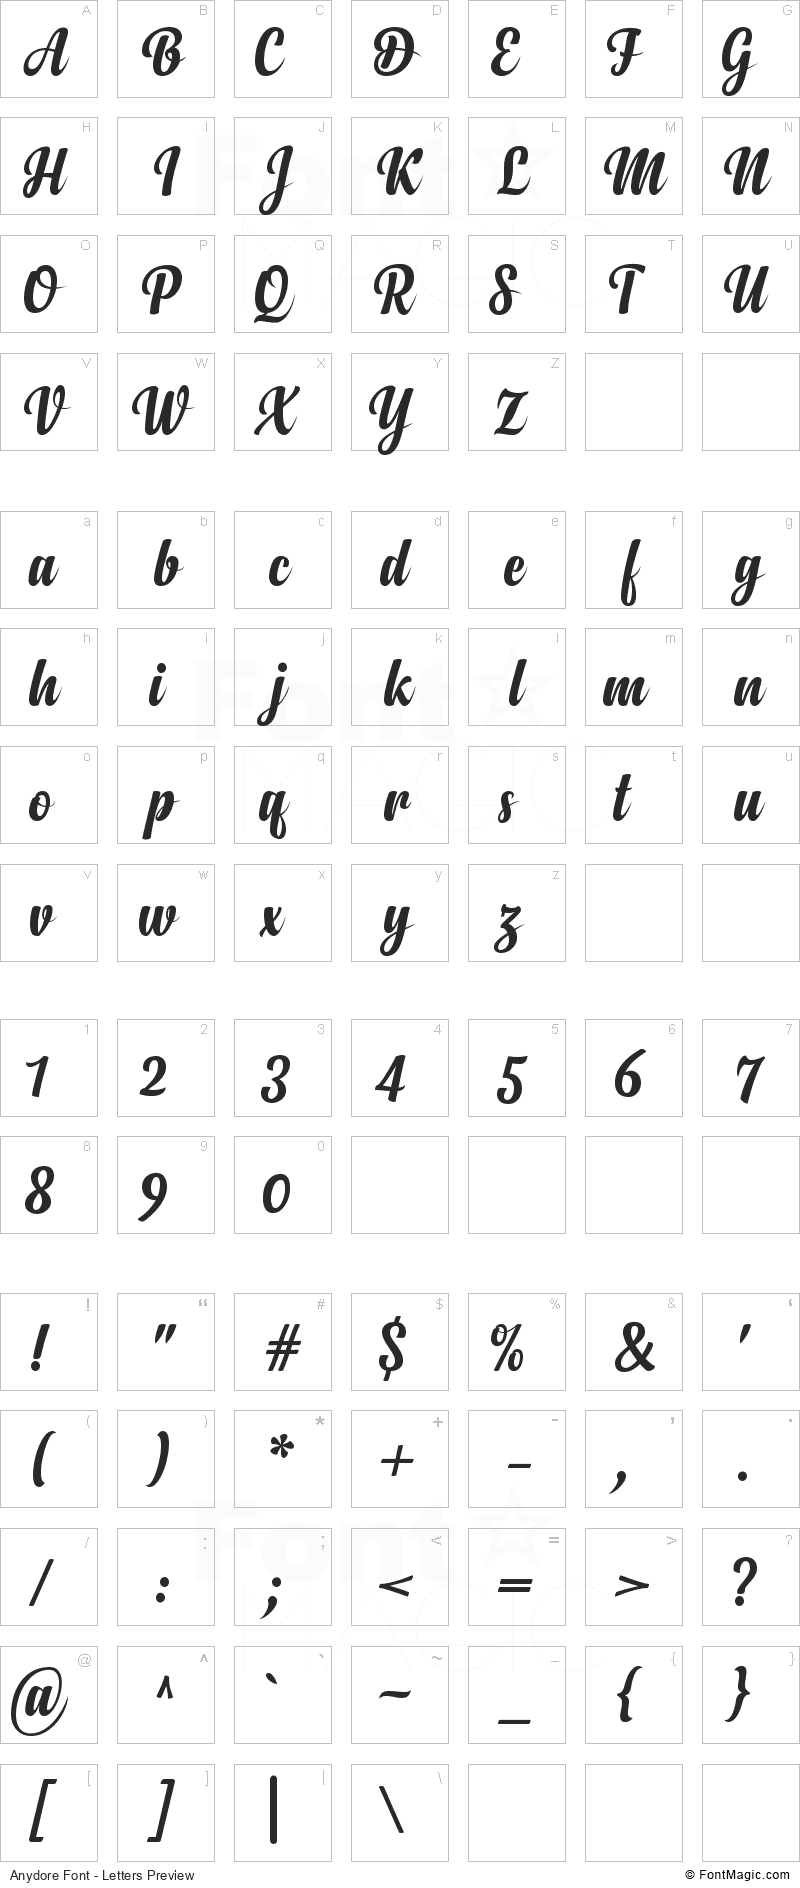 Anydore Font - All Latters Preview Chart